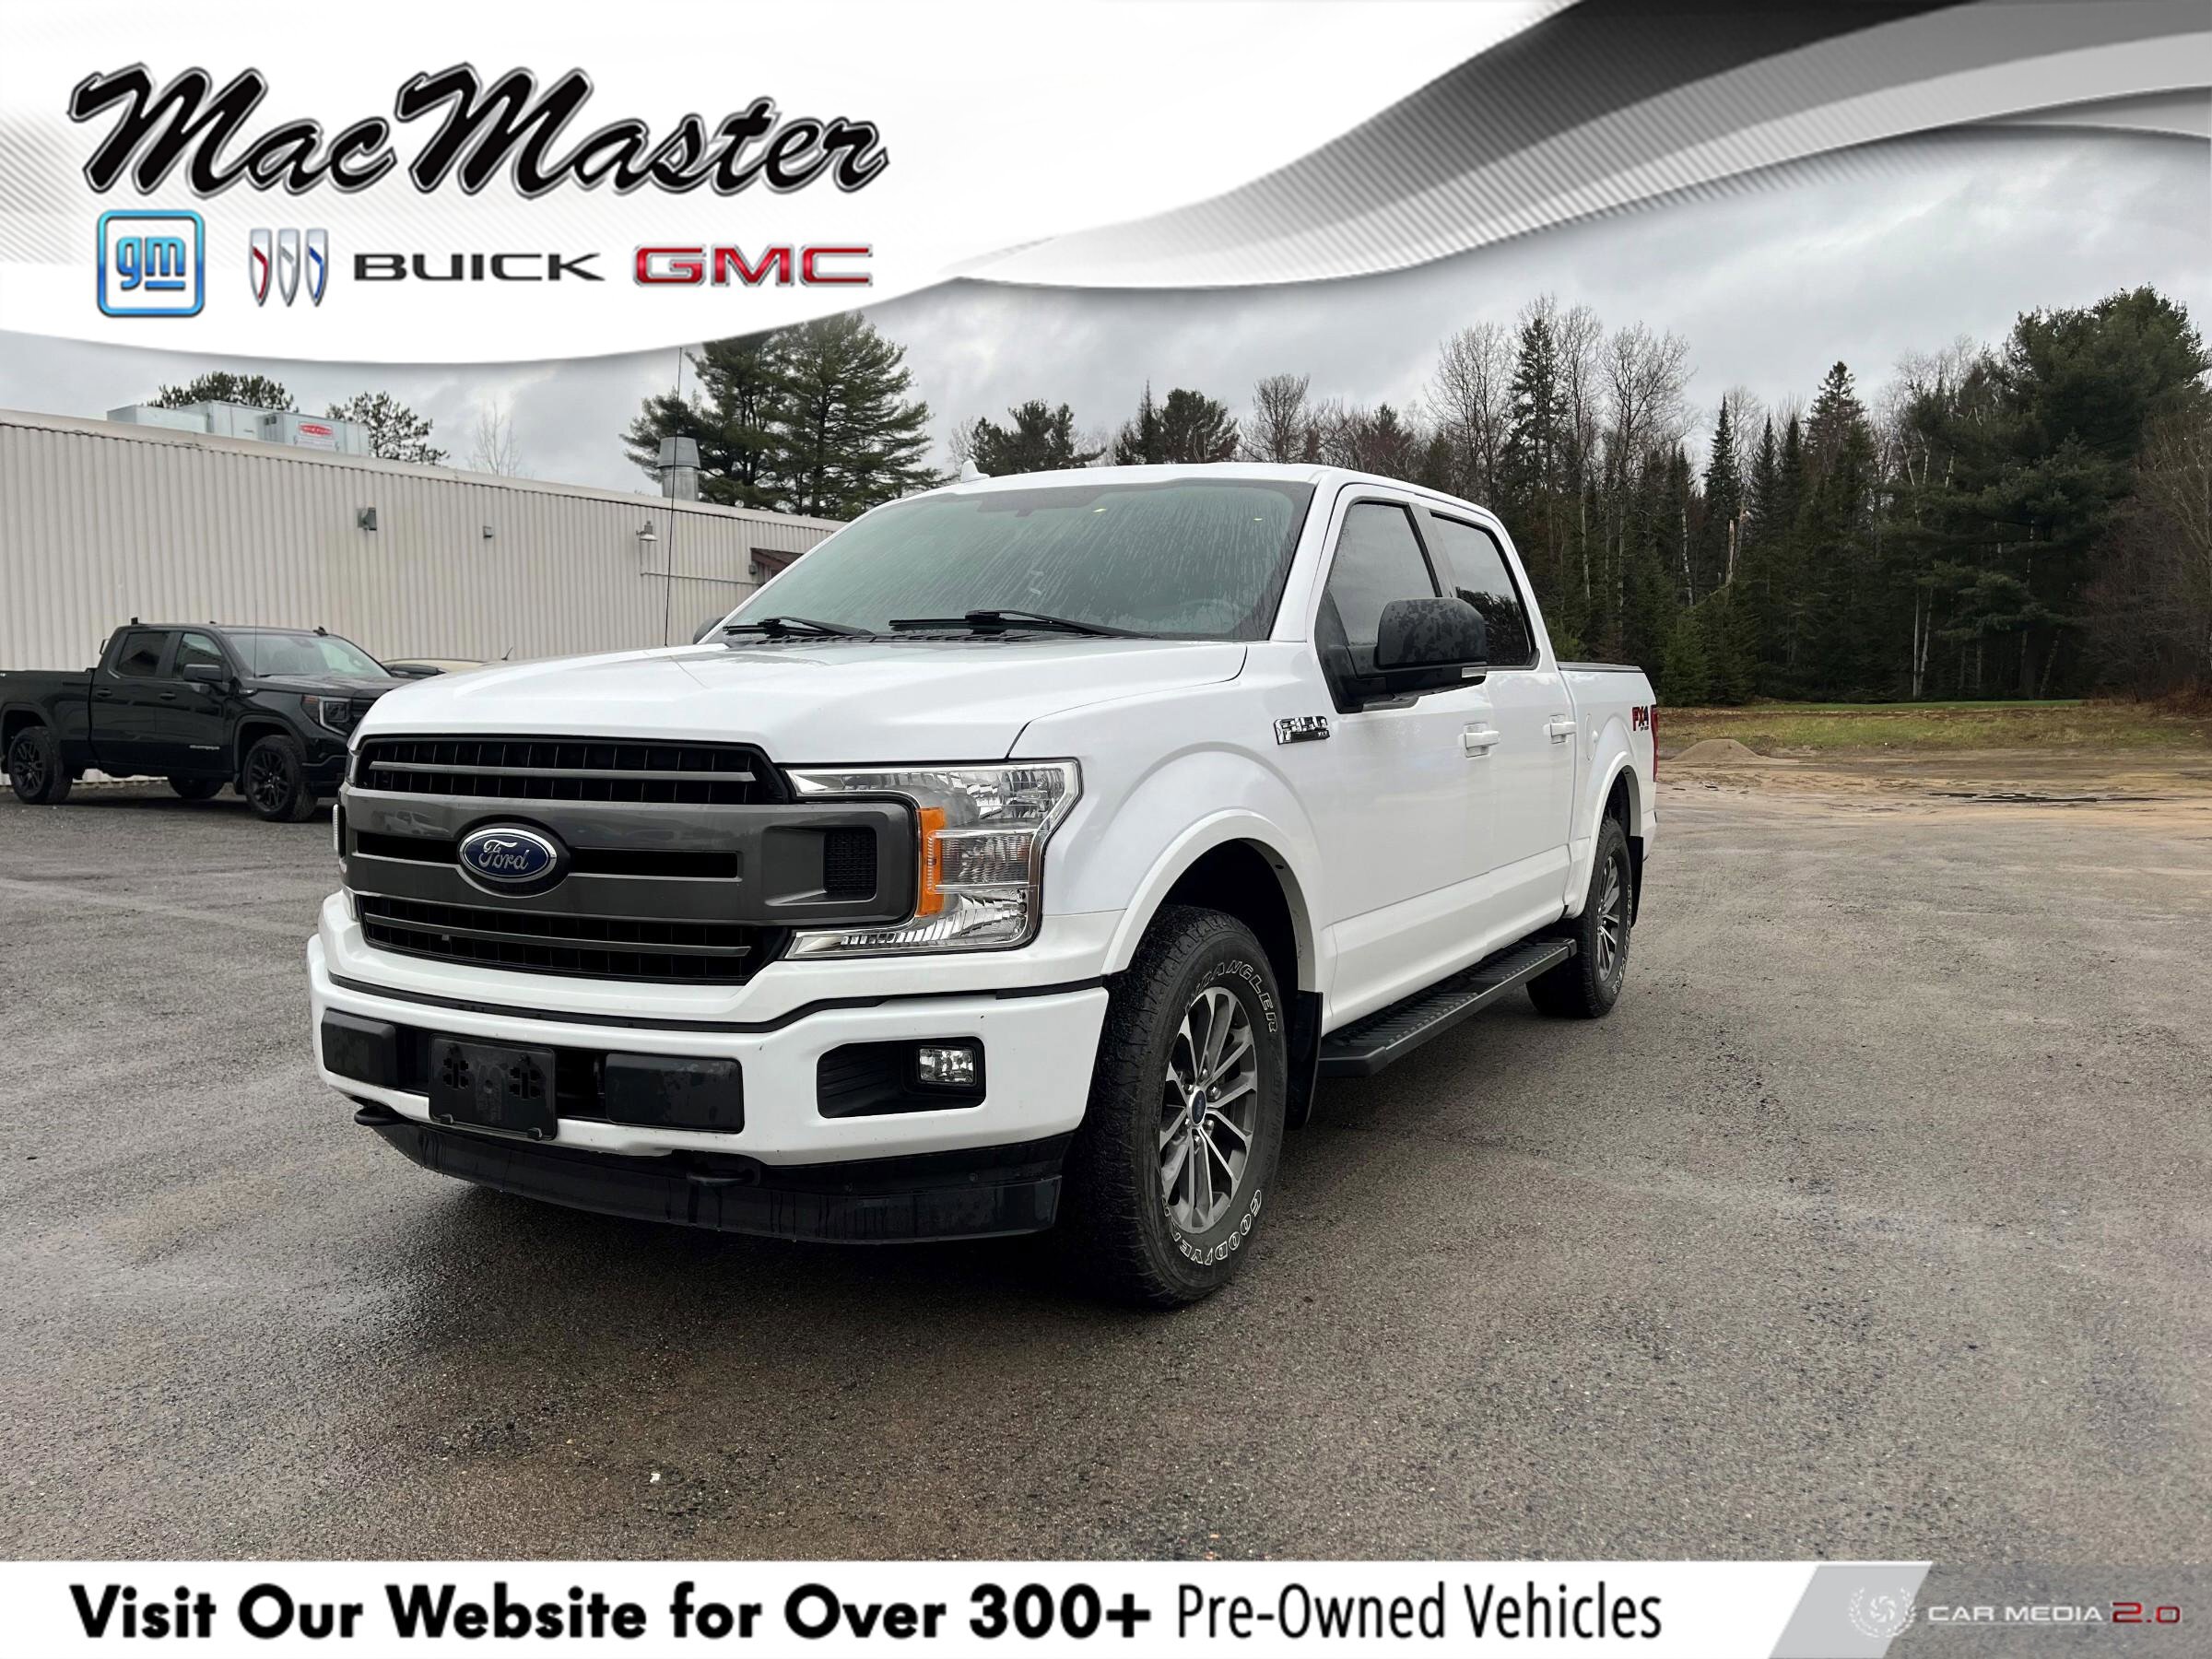 2018 Ford F-150 XLT CERTIFIED PRE-OWNED | 1-OWNER | CLEAN CARFAX